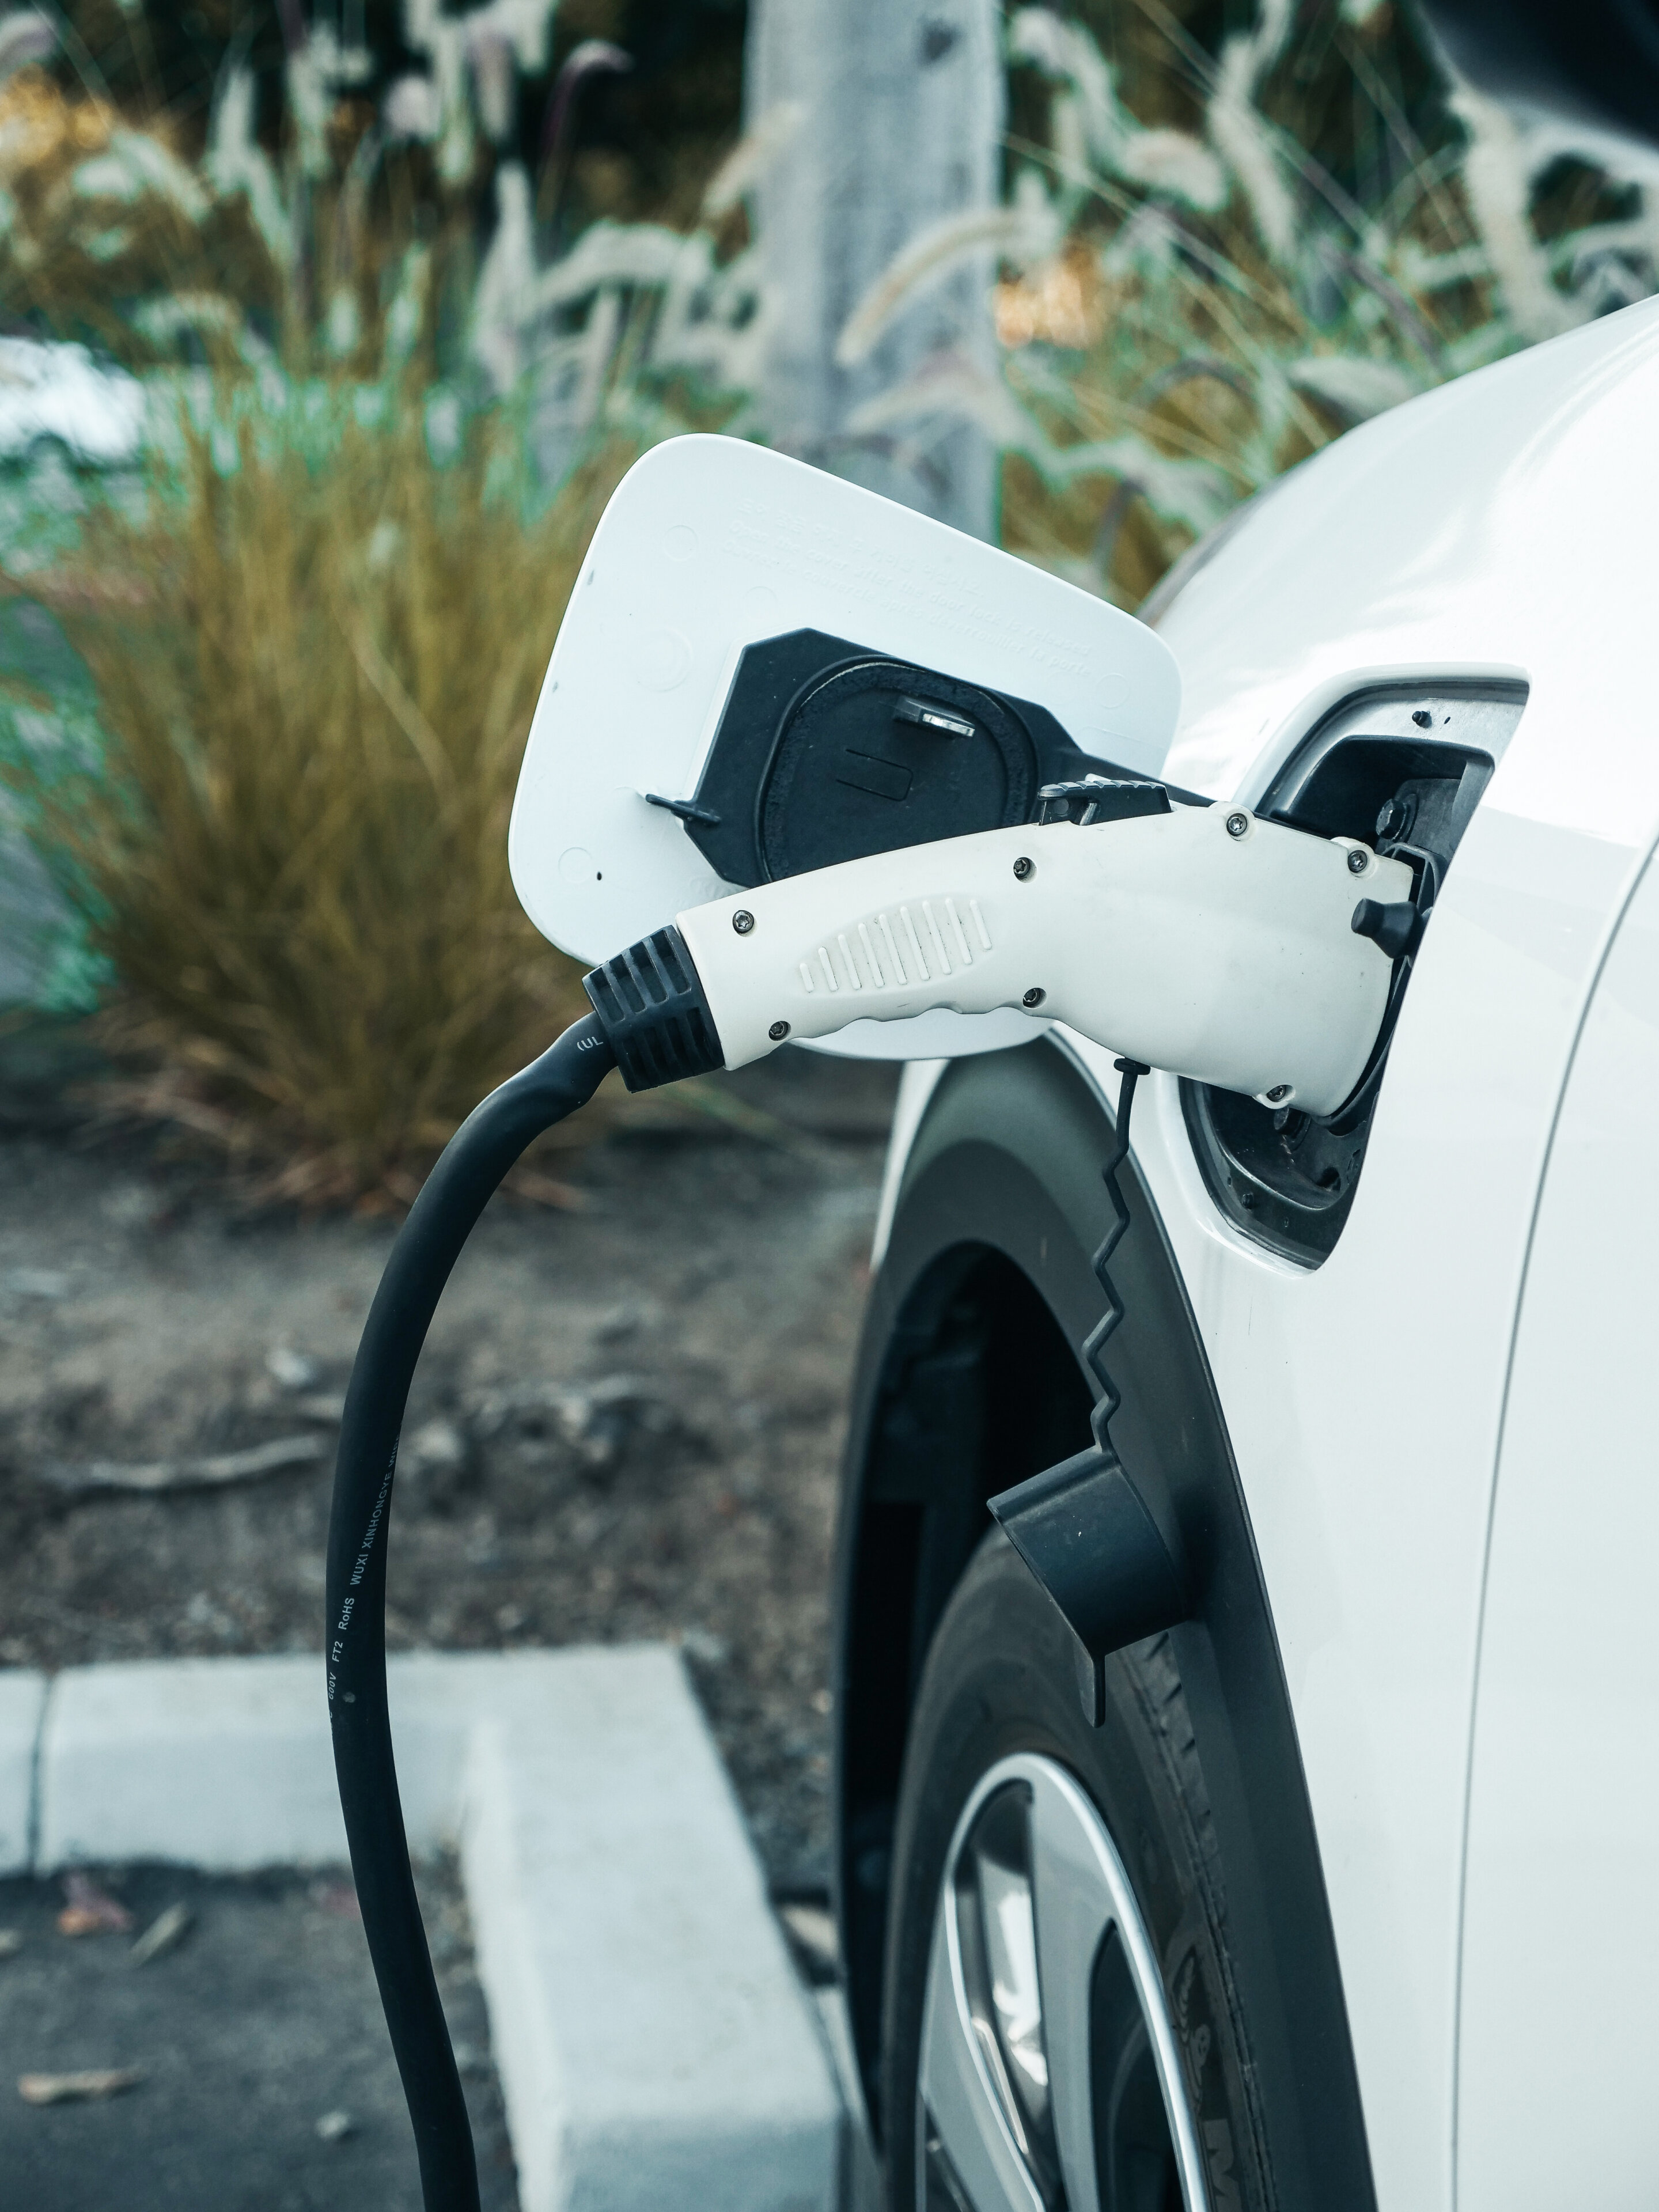 How to predict and manage EV charging growth to keep electricity grids reliable and affordable